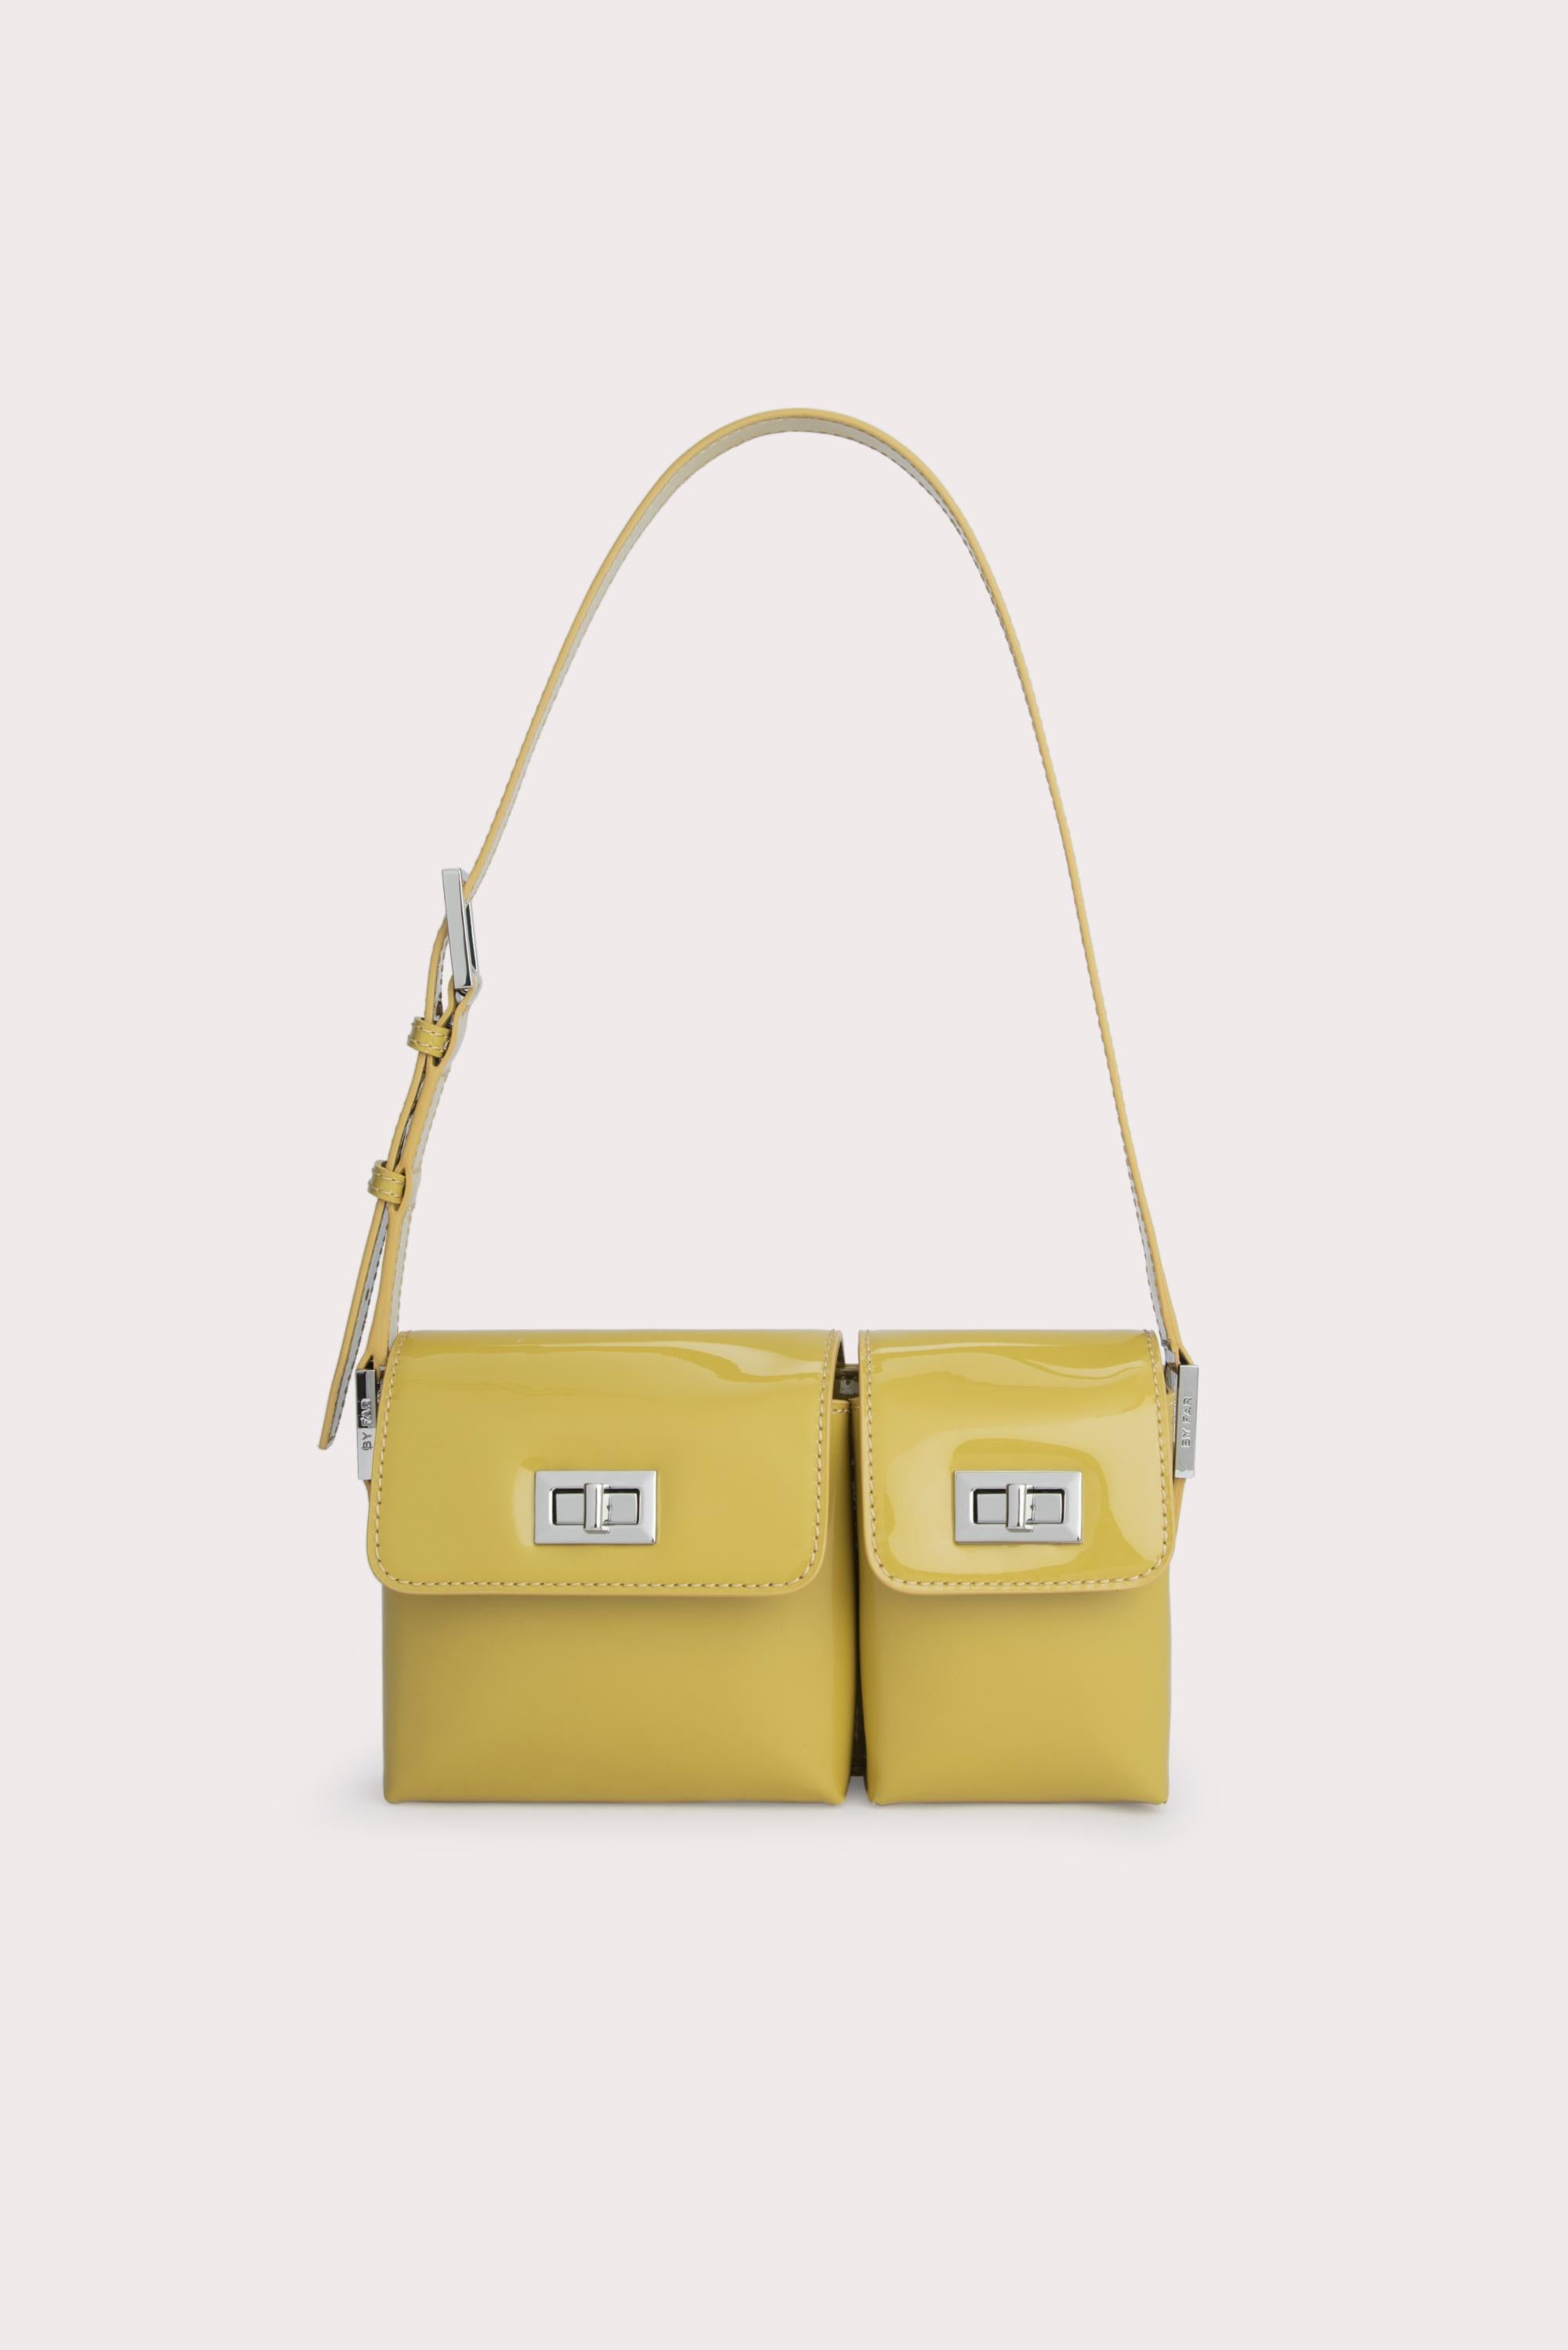 BY FAR Yellow Patent Leather Billy Bag